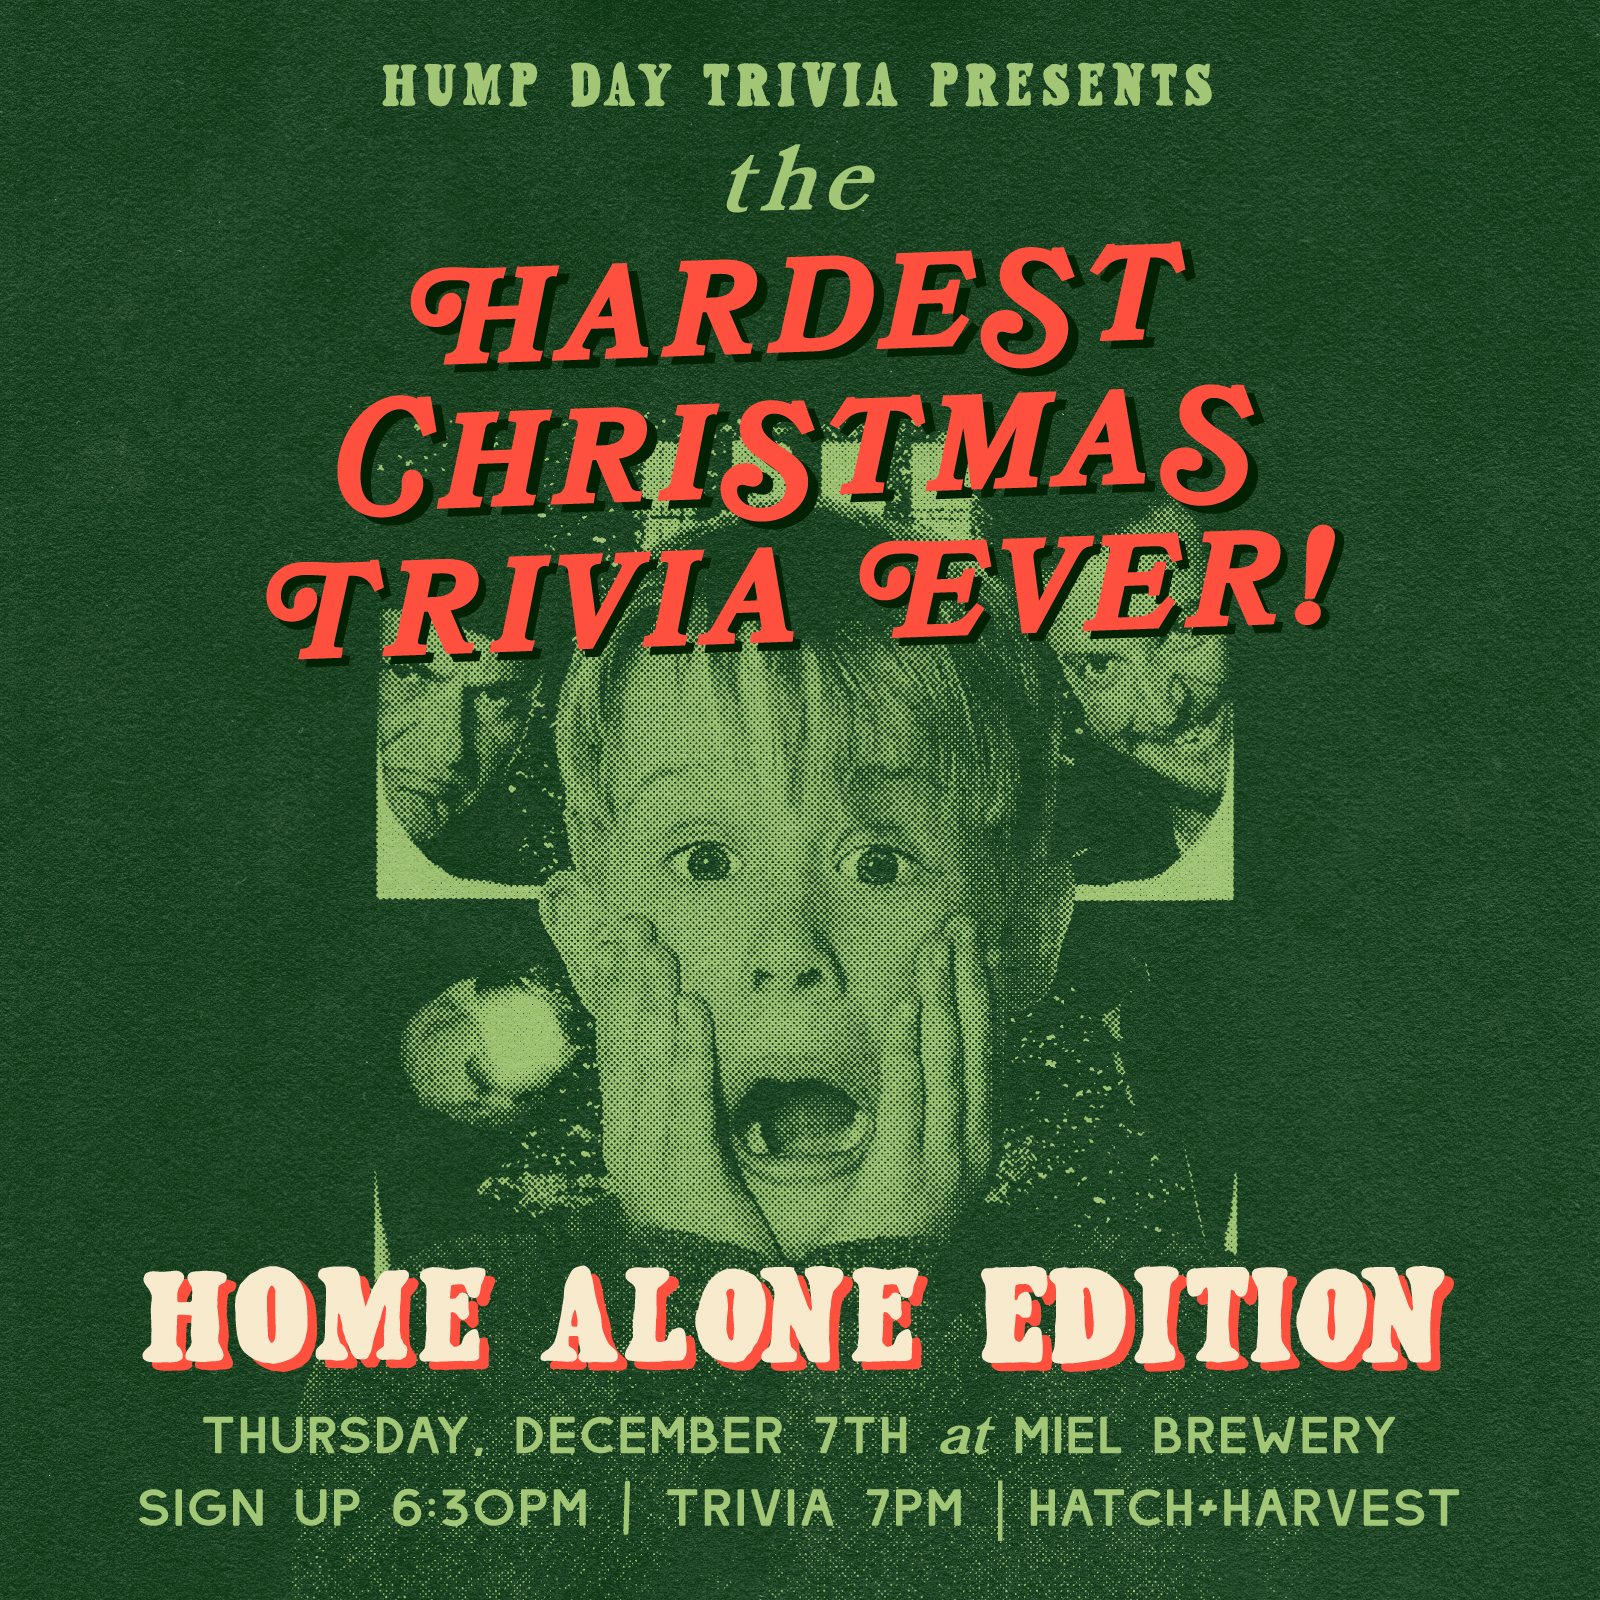 The Hardest Christmas Movie Trivia Ever: Home Alone Edition square poster